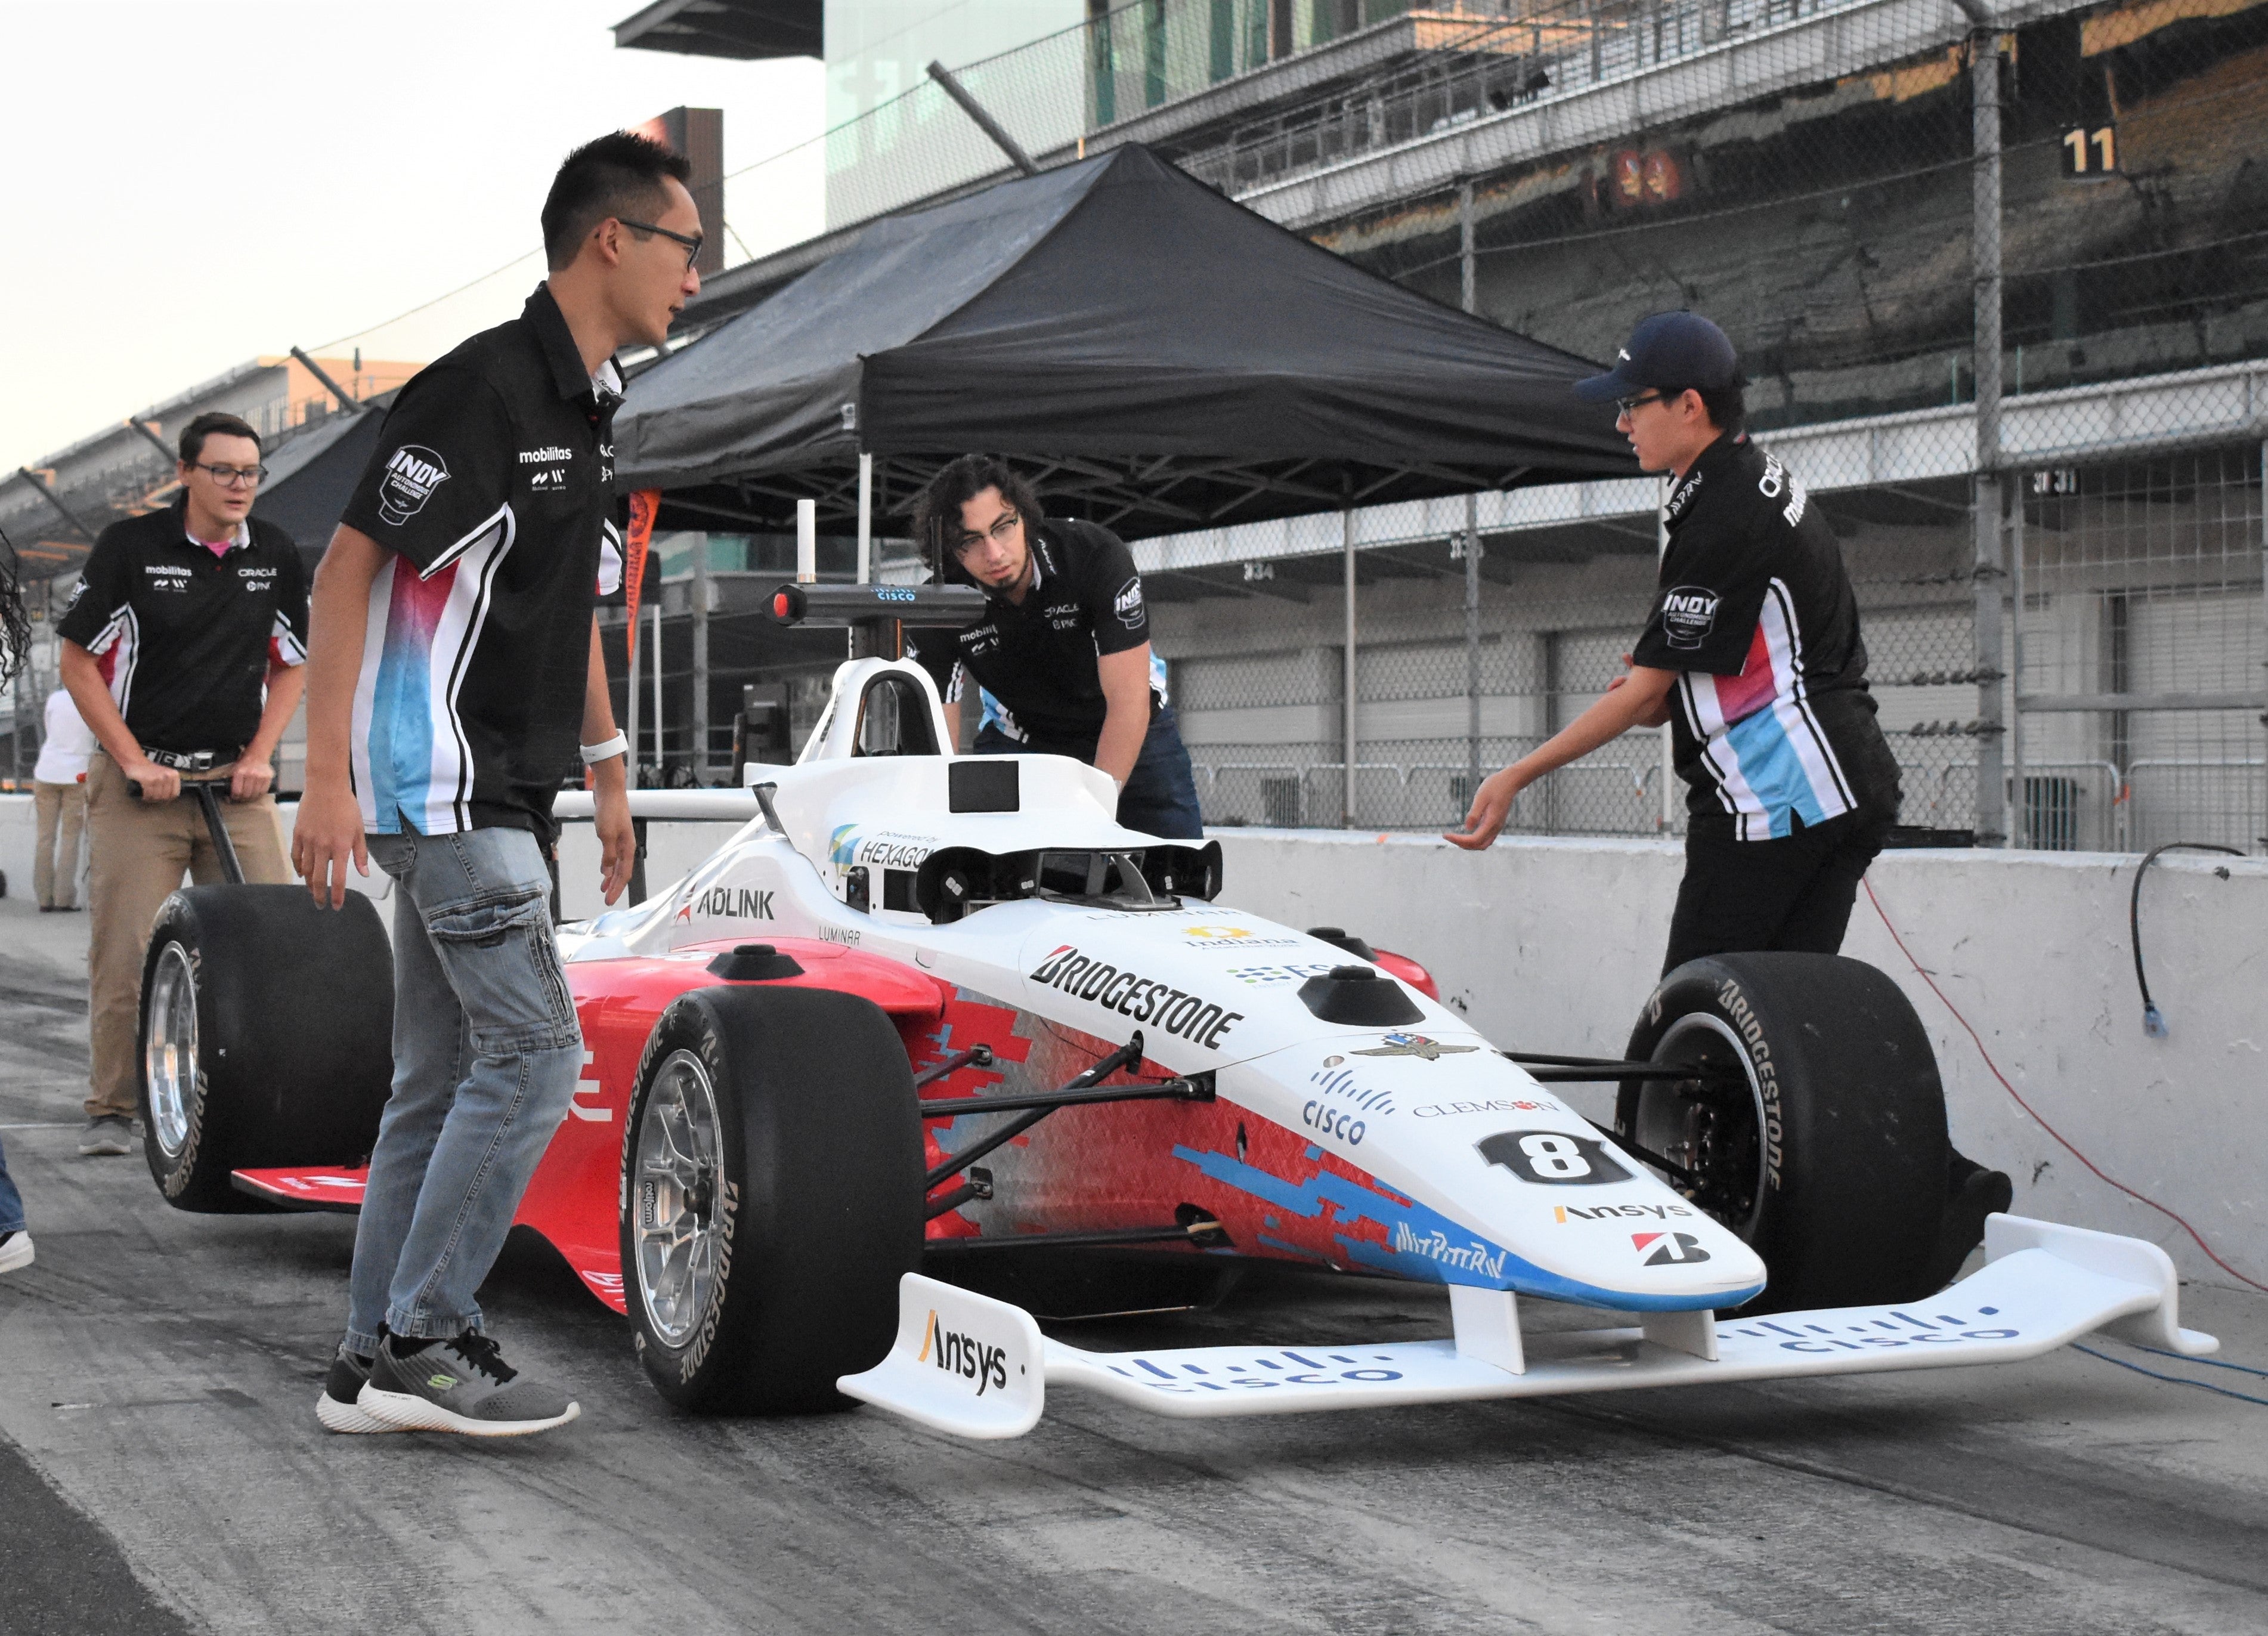 Brian Mao, front left, and Ben Zhang, front right, work on their car in the pits at the Indianapolis Motor Speedway.